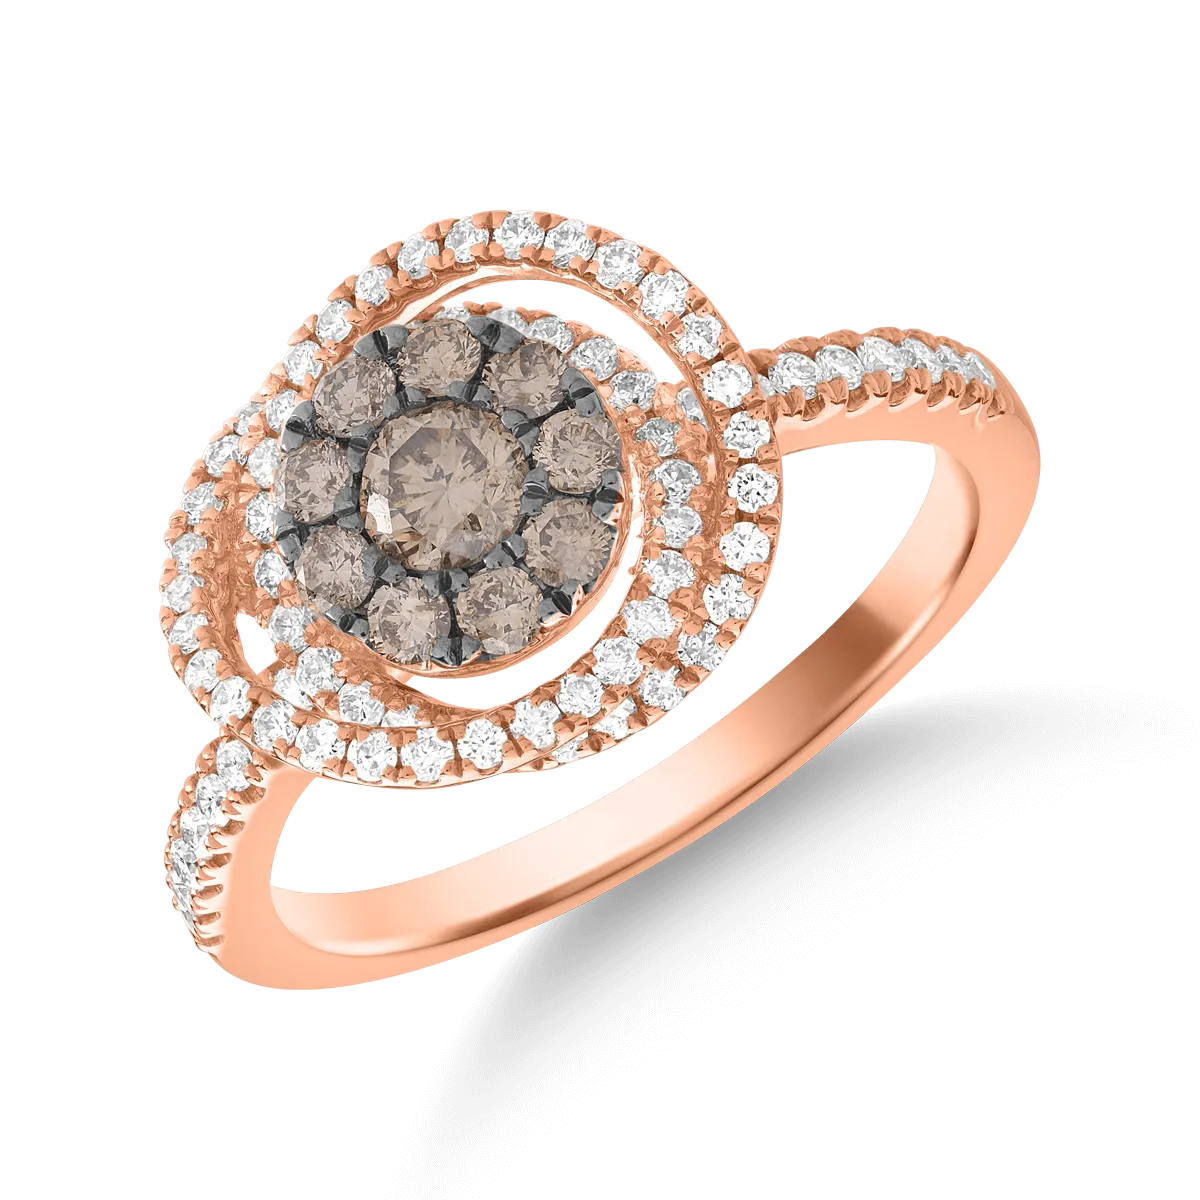 14K rose gold ring with 0.3ct brown diamonds and 0.28ct white diamonds